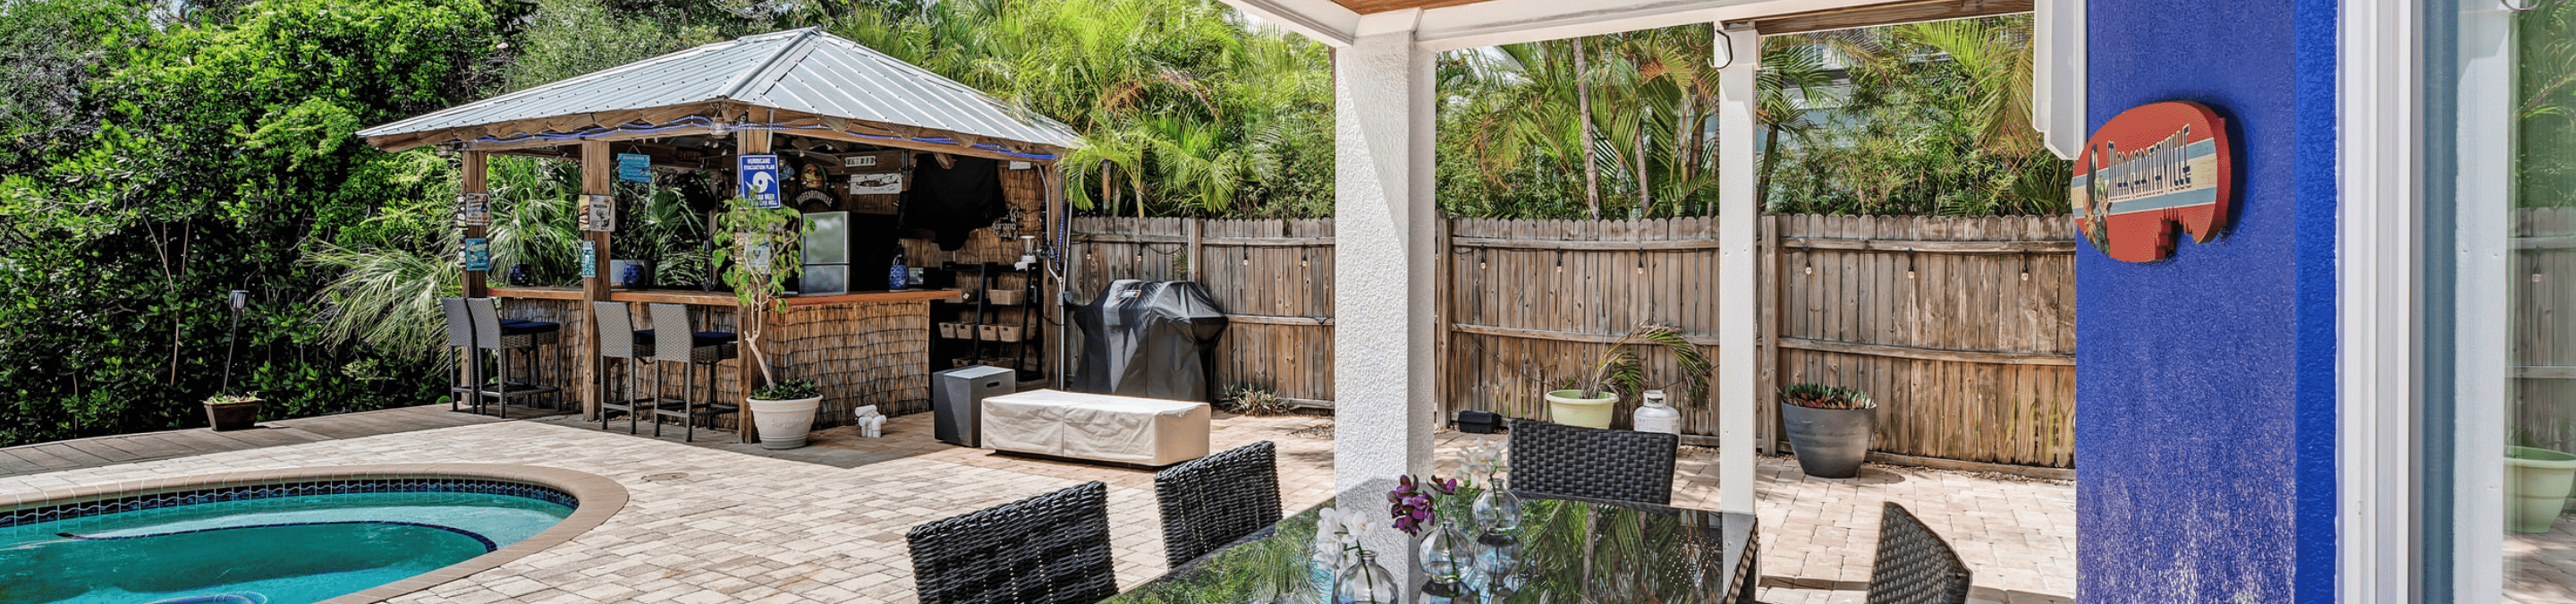 covered patio over a dining table overlooking pool with paver patio and a covered bar on the side of the pool located at our 5 bedroom vacation rental on anna maria island